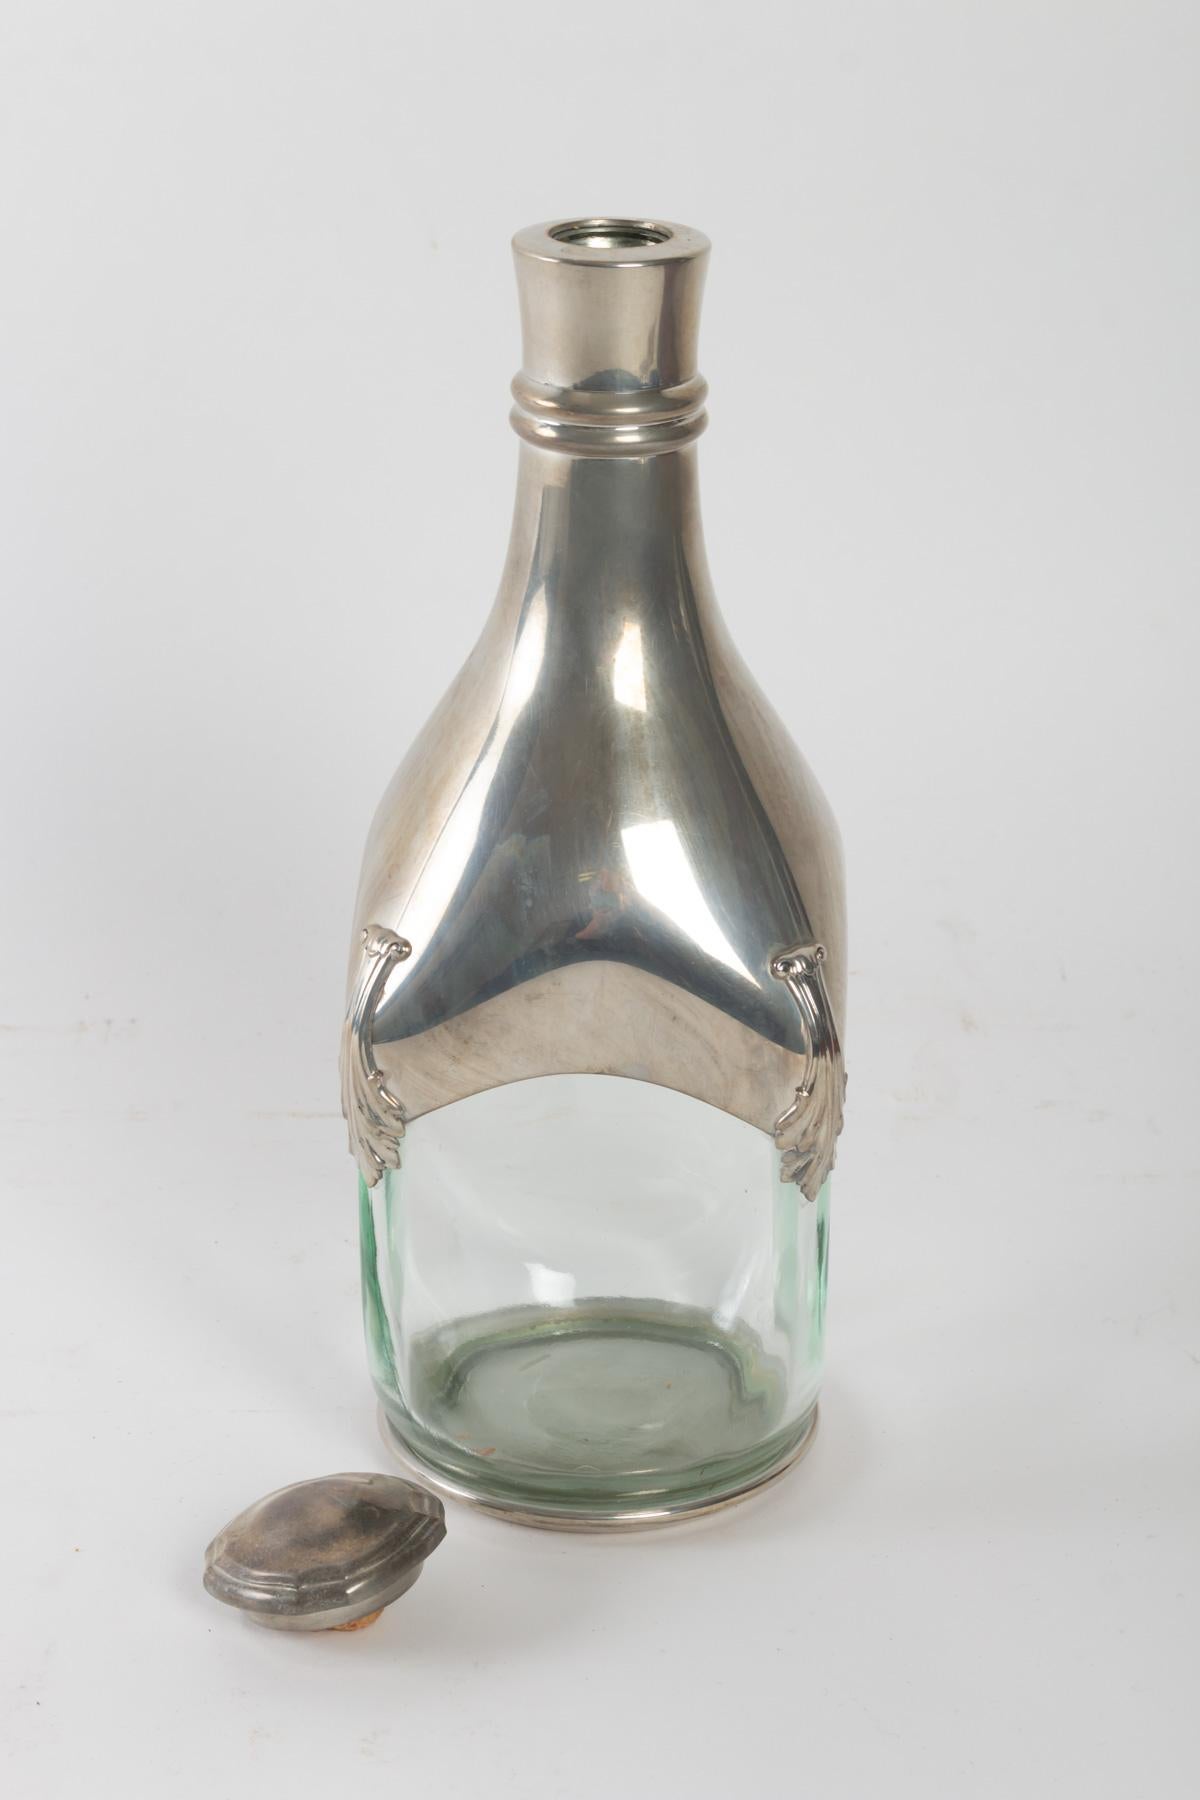 Crystal and silver metal decanter, 20 century.
Measures: H 27 cm, L 10 cm, W 10 cm.